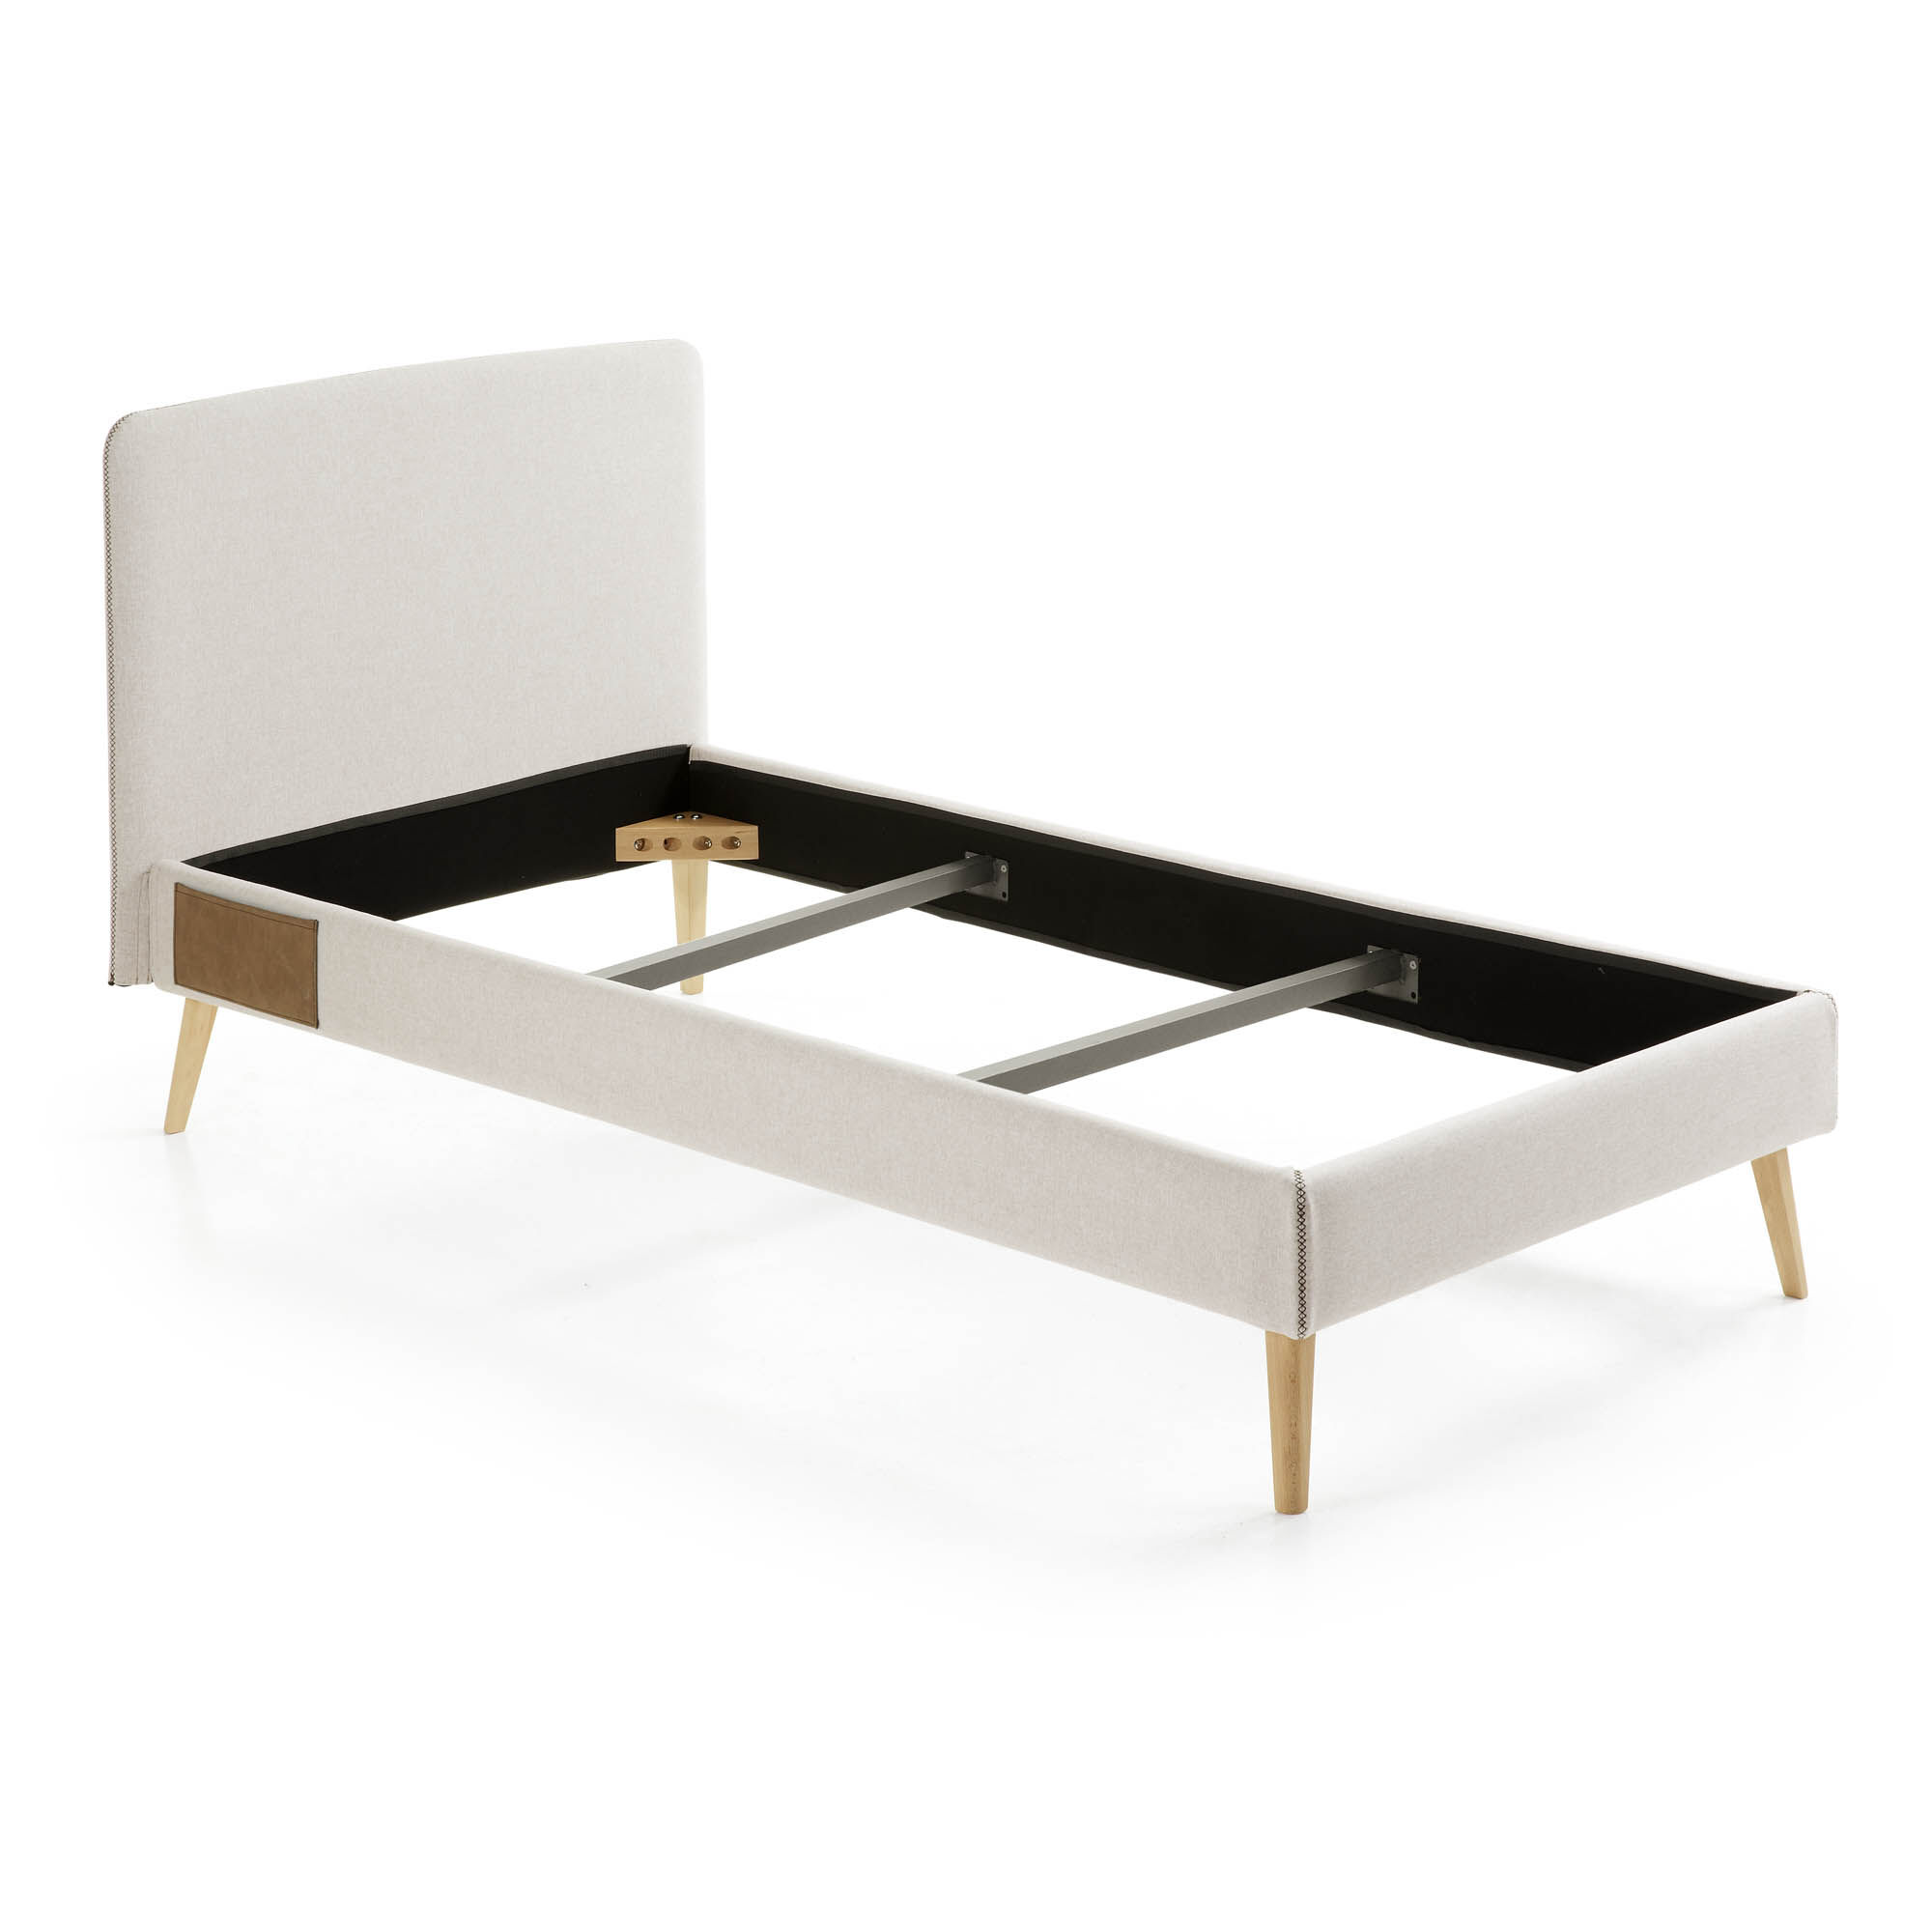 Kave Home Dyla beige bed with removable cover and solid beech legs 90 x 190 cm